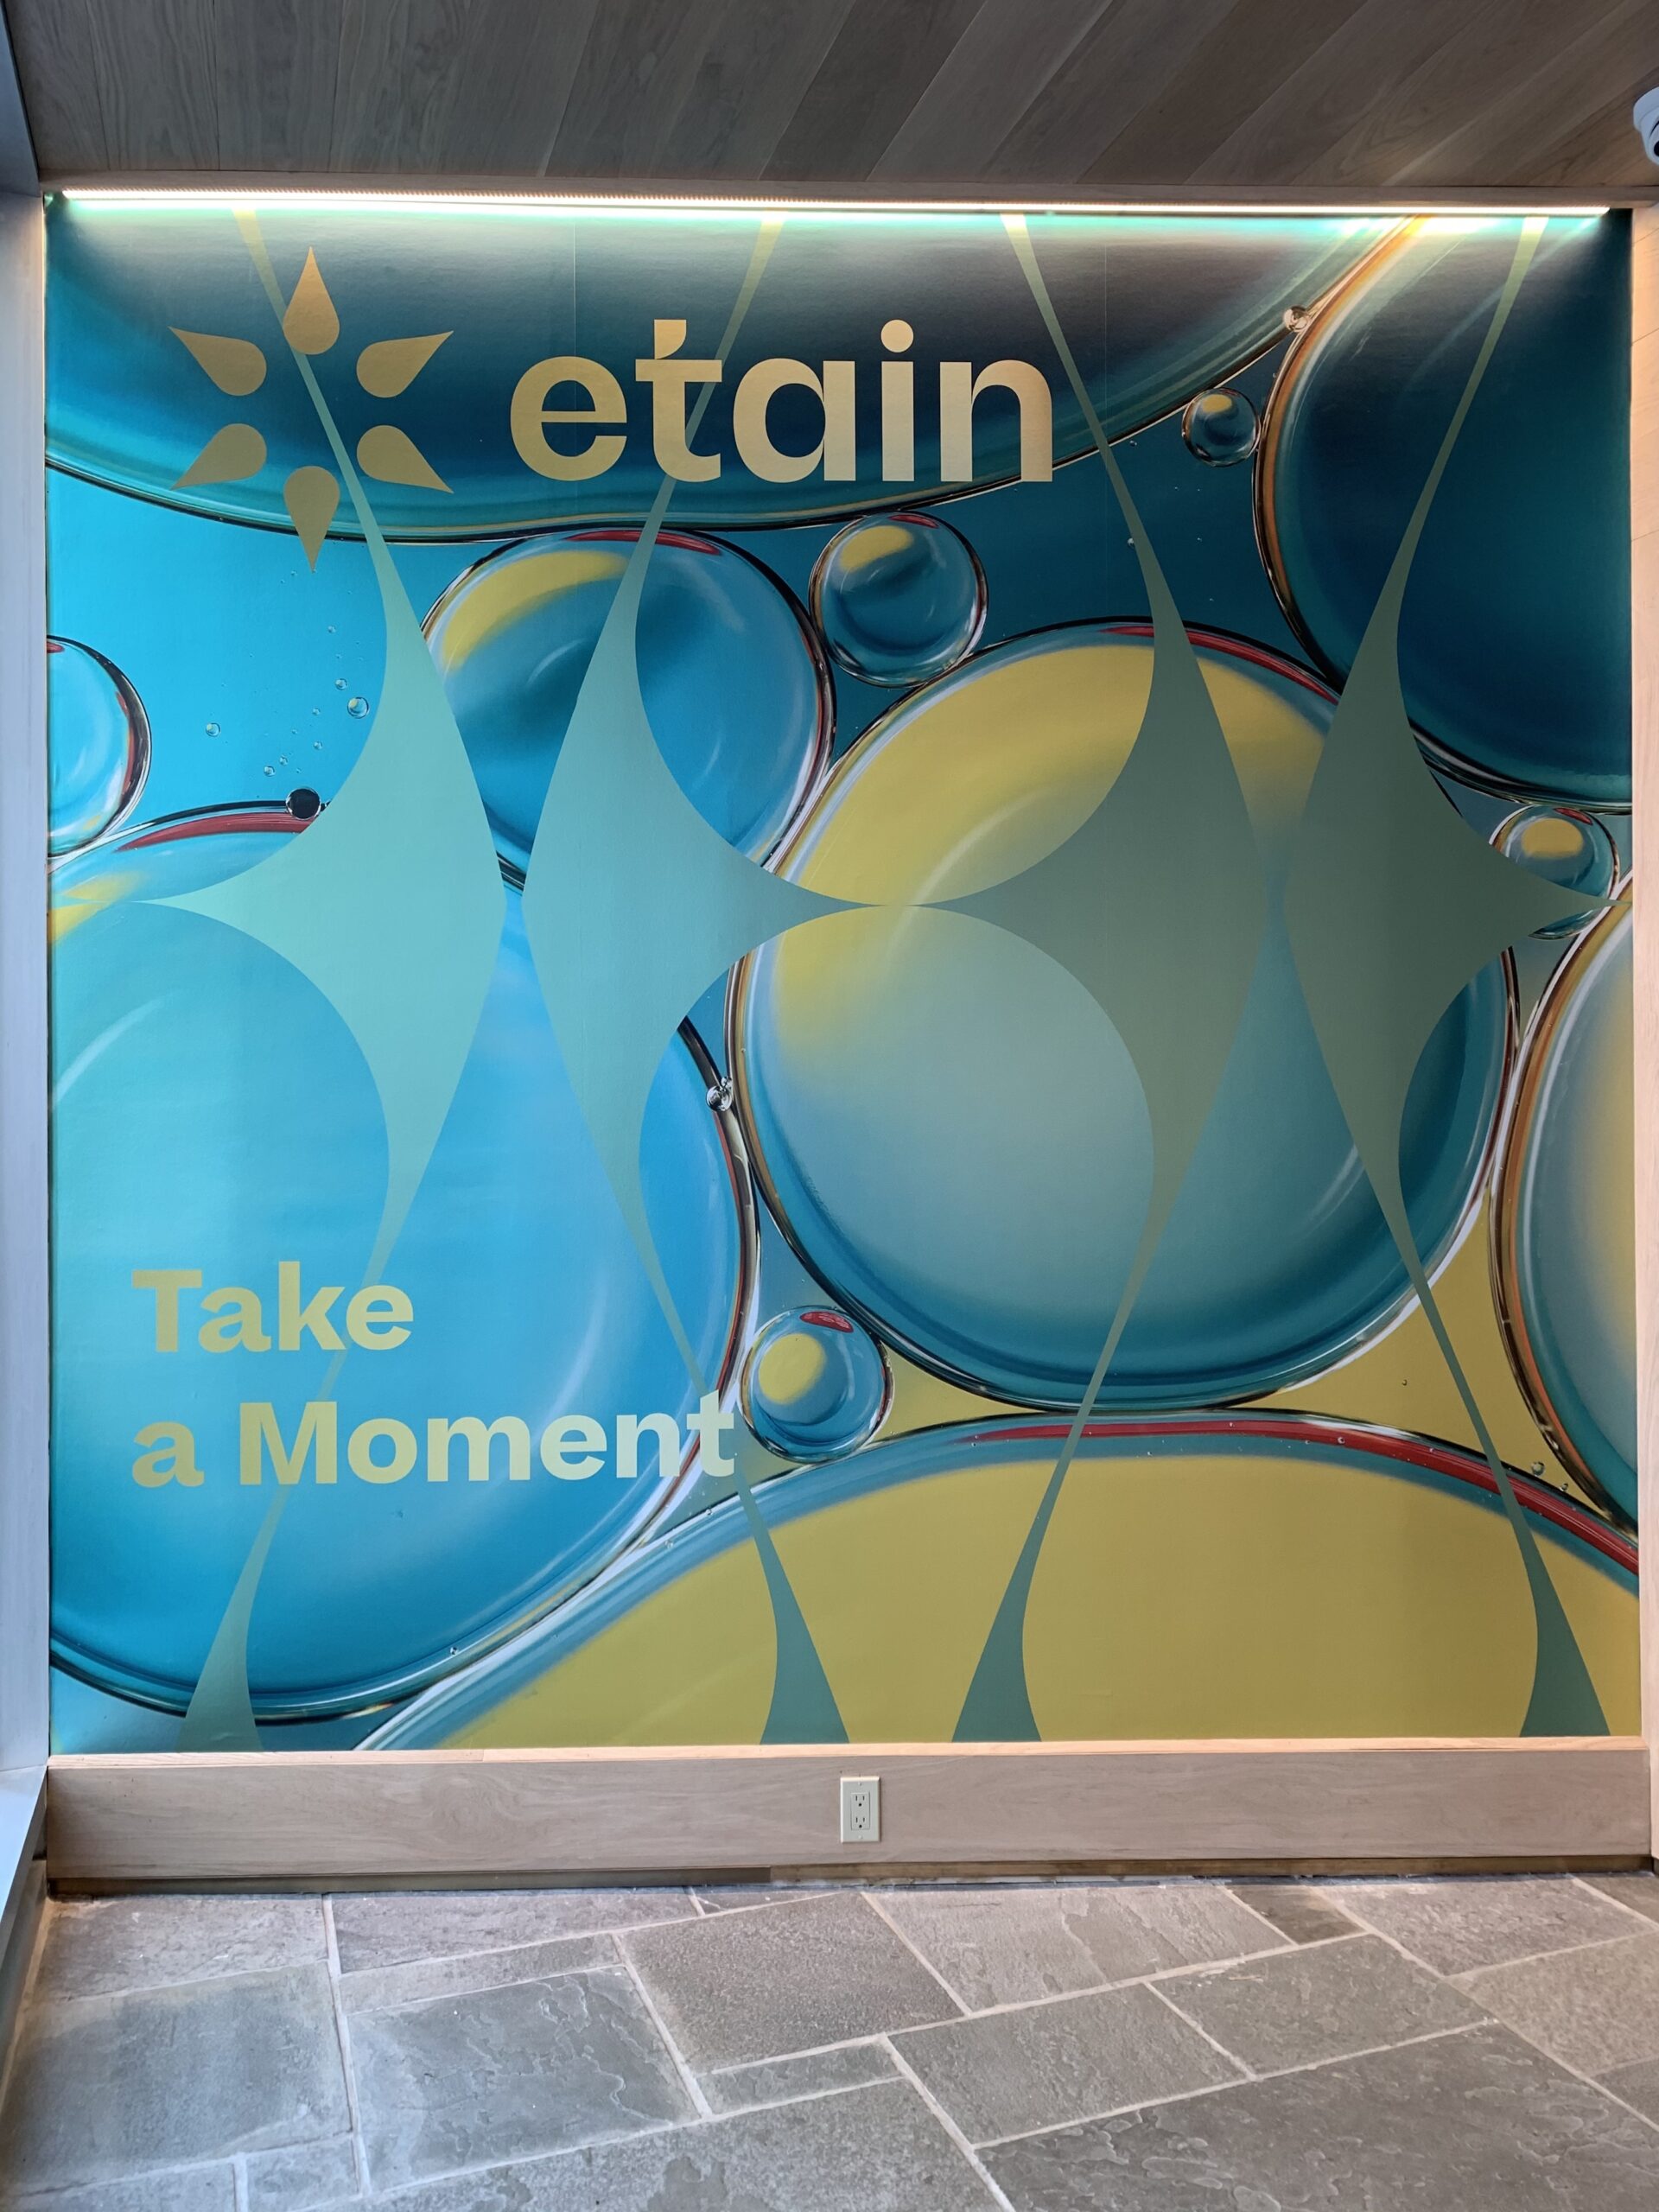 entry wall to etain with blue and yellow abstracts designs and a sign that says take a moment 